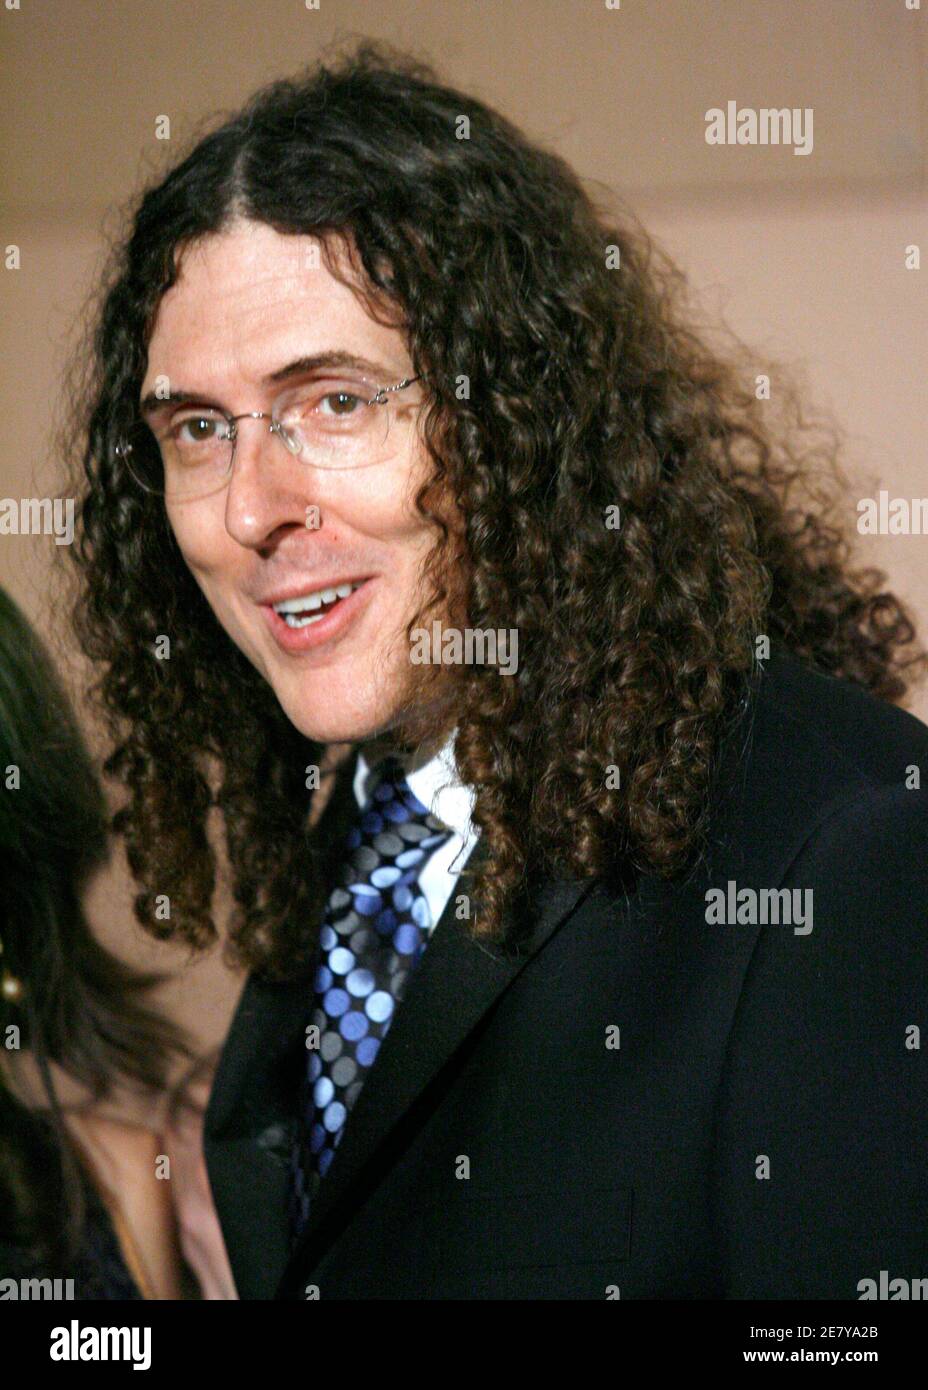 Grammy Award winner Weird Al Yankovic arrives at the Sony BMG Music Entertainment after- party in Beverly Hills February 11, 2007. REUTERS/Gus Ruelas  (UNITED STATES) Stock Photo